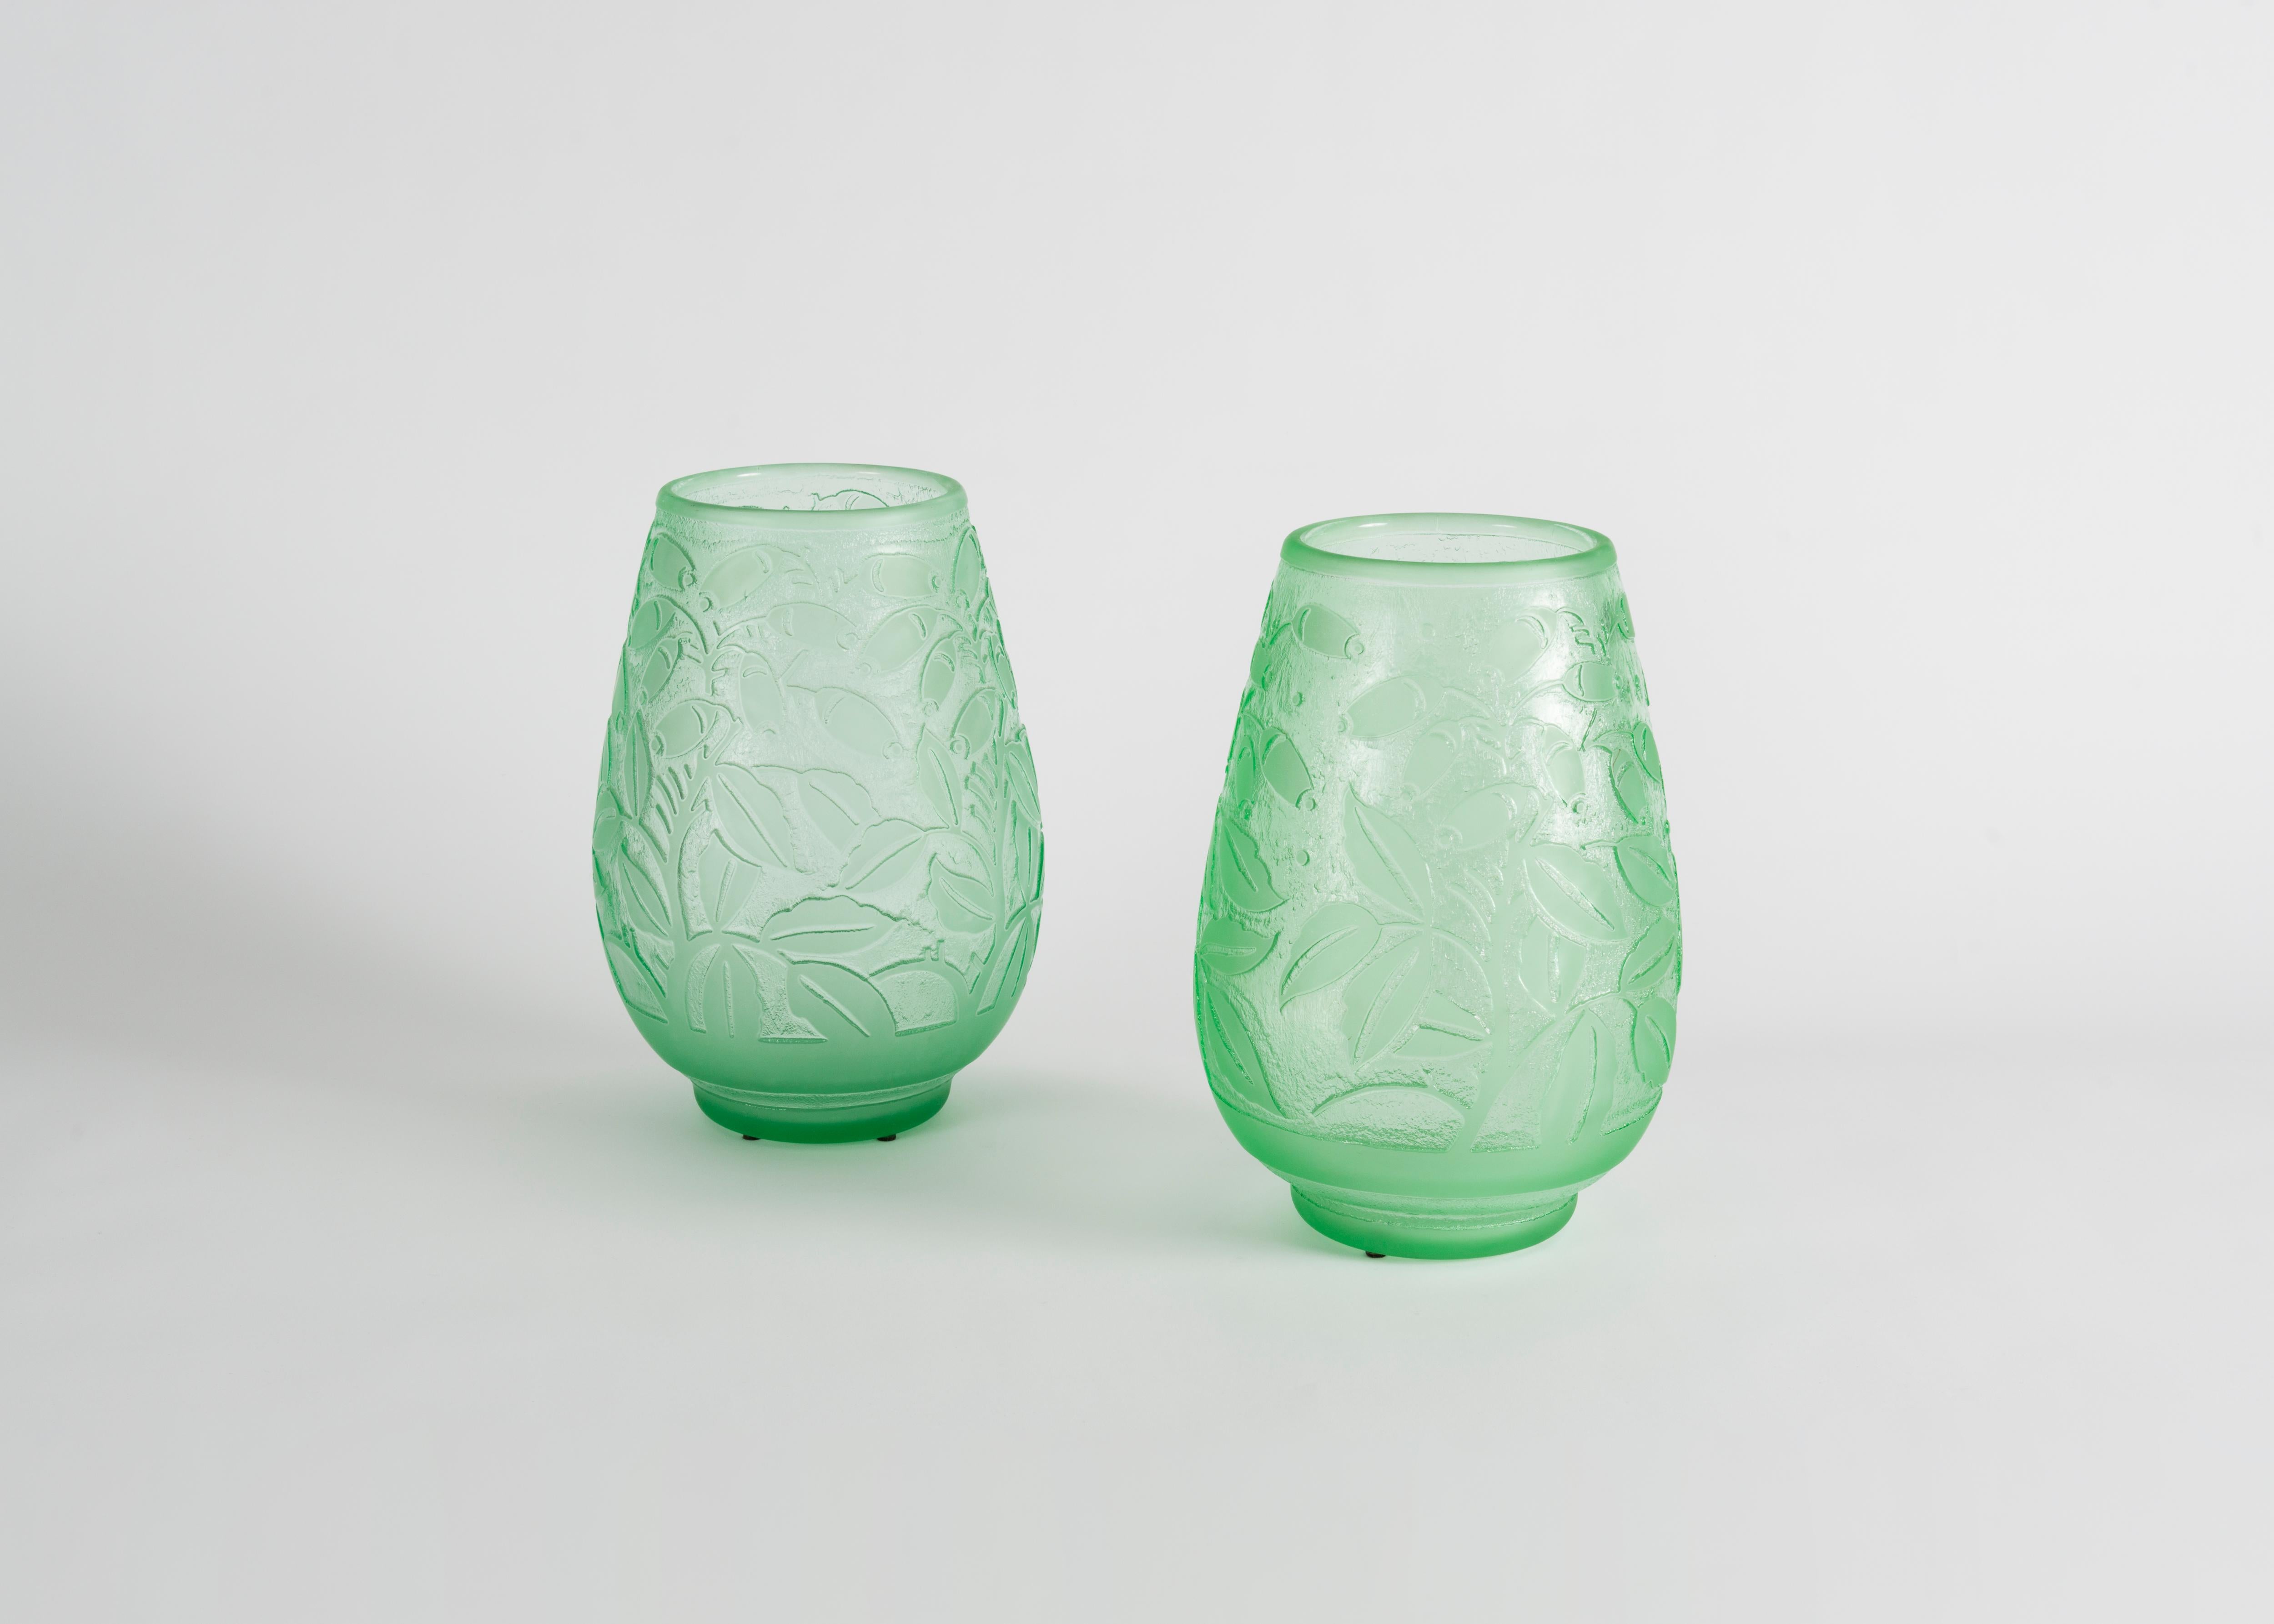 Etched Daum, Incised Art Deco Glass Vases, France, Early 20th Century For Sale